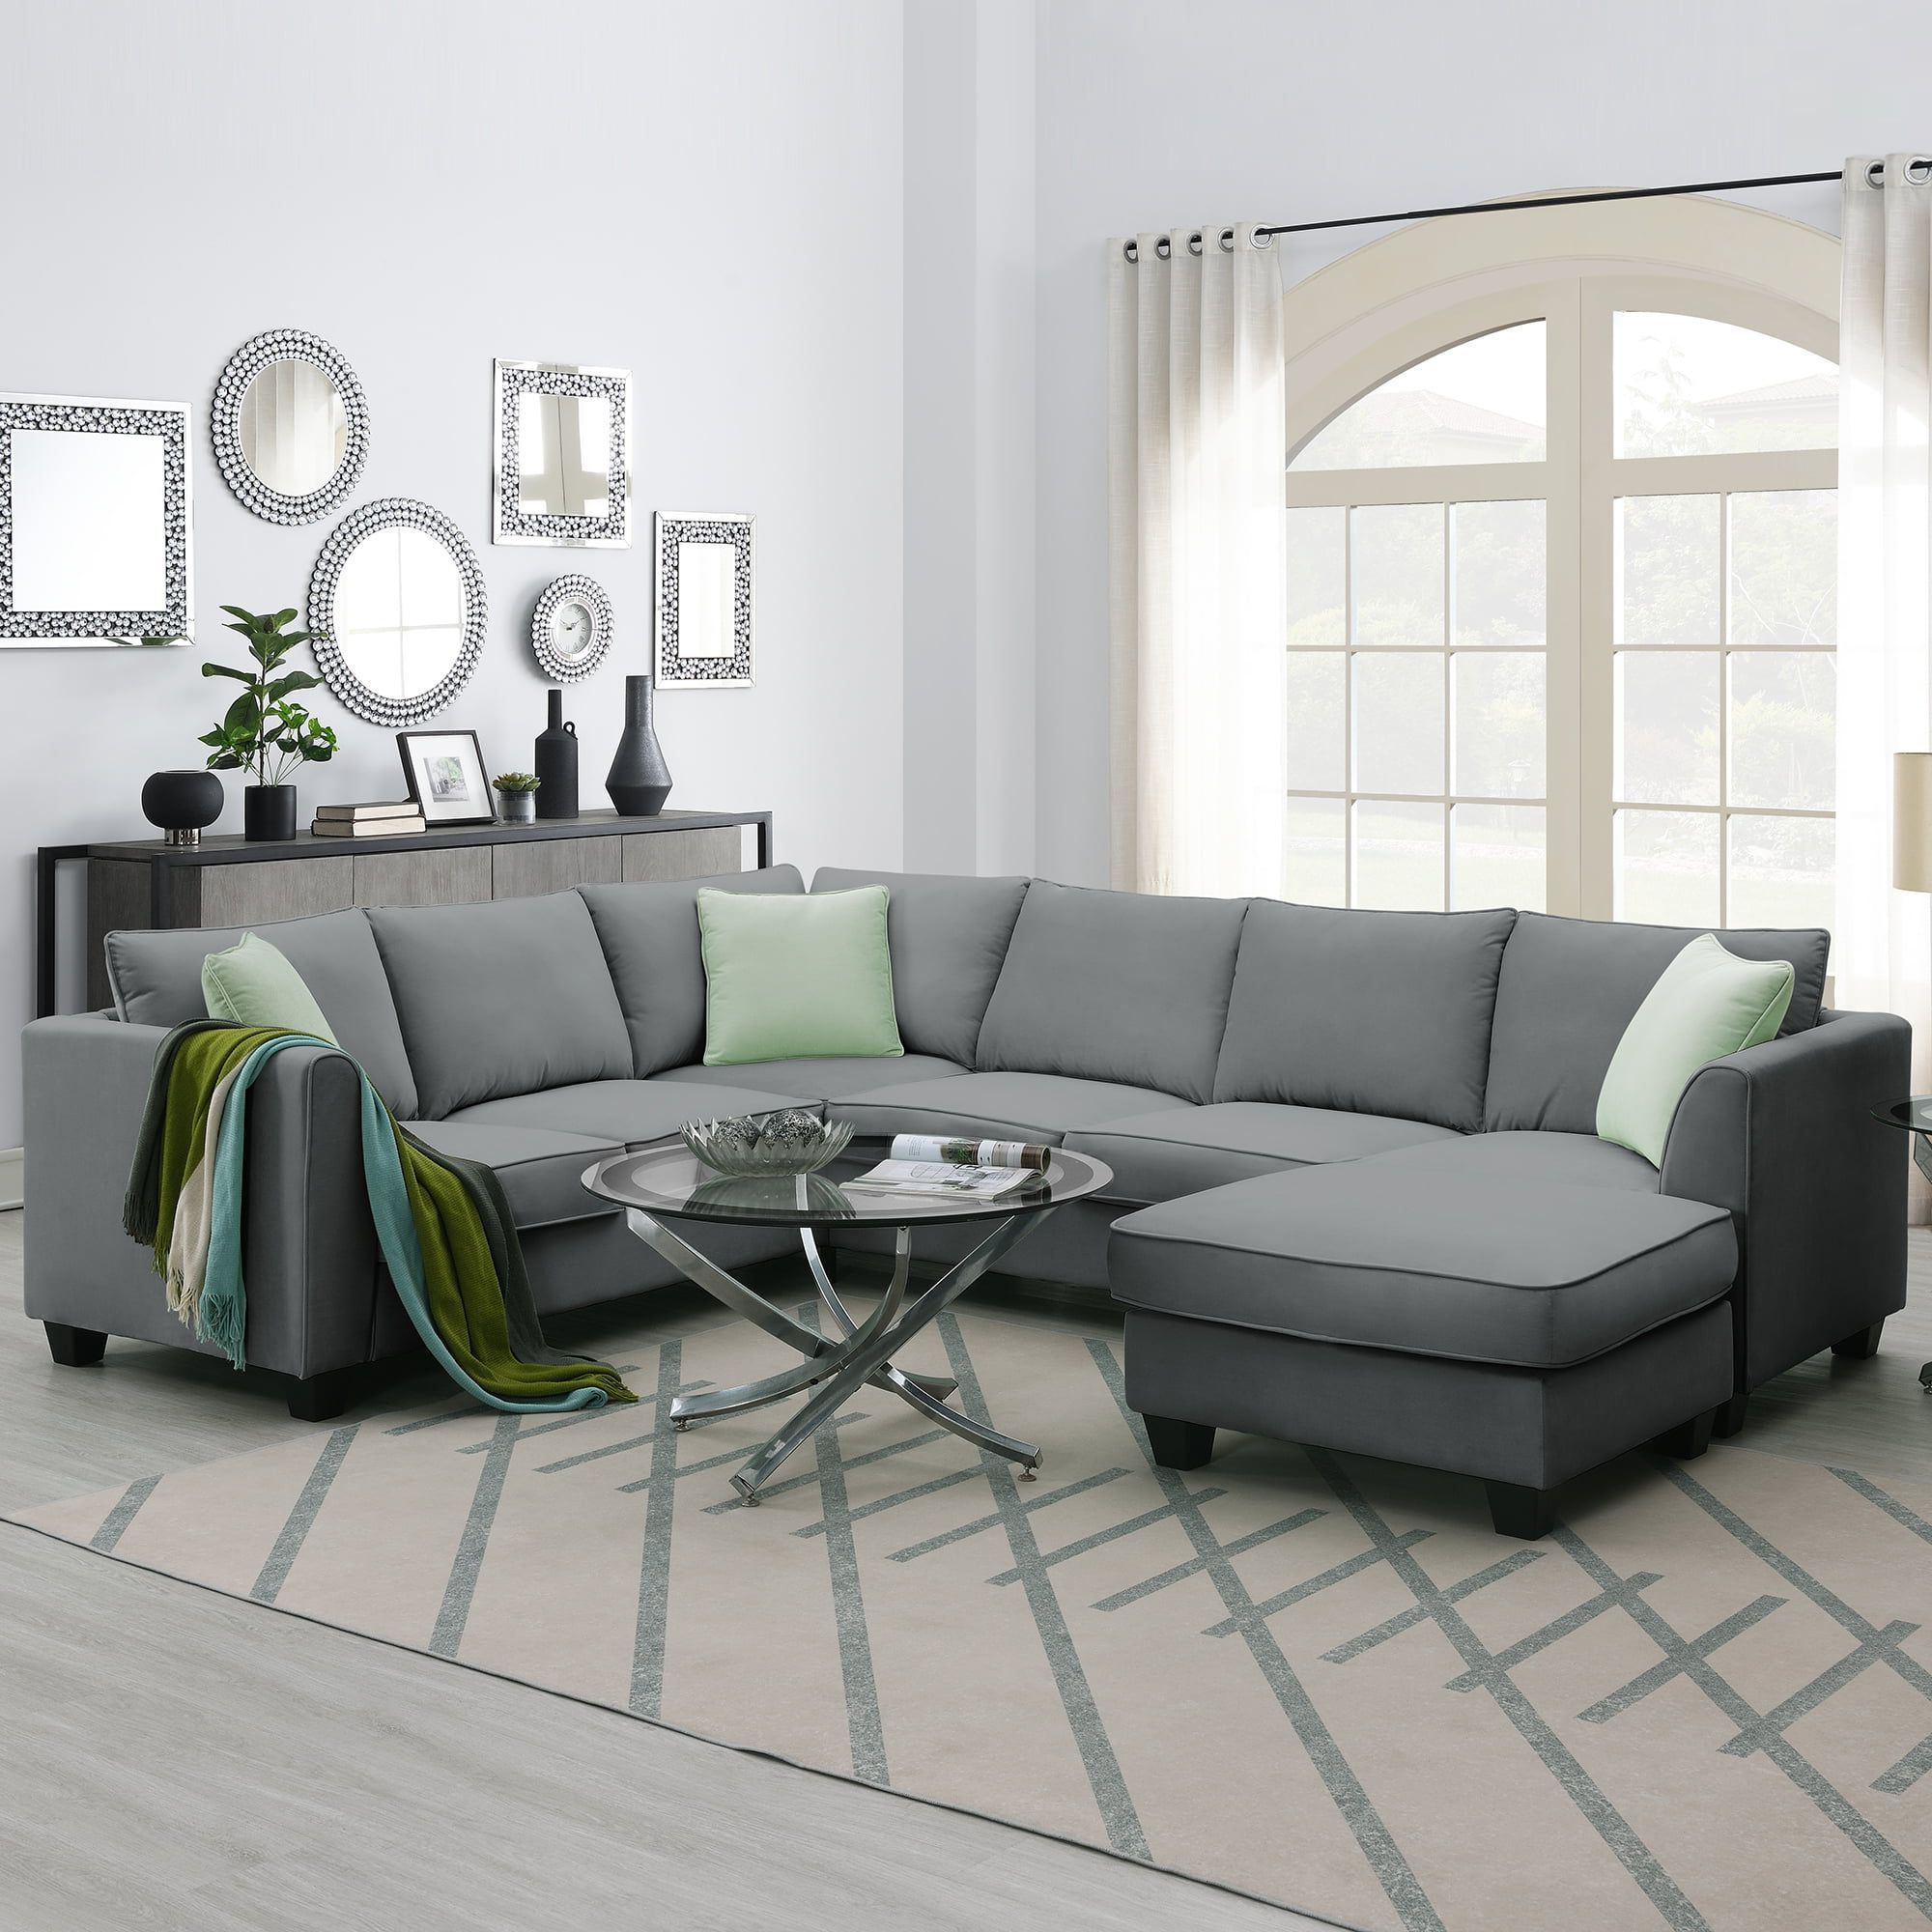 L Shaped Modular Sectional Couch, Kamida 7 Seater Sectional Couch With  Ottoman And 3 Pillows, Modern L Shaped Fabric Upholstered Couch Furniture,  Heavy Duty Sectional Couch For Living Room, Gray – Walmart For Modern L Shaped Fabric Upholstered Couches (Gallery 3 of 20)